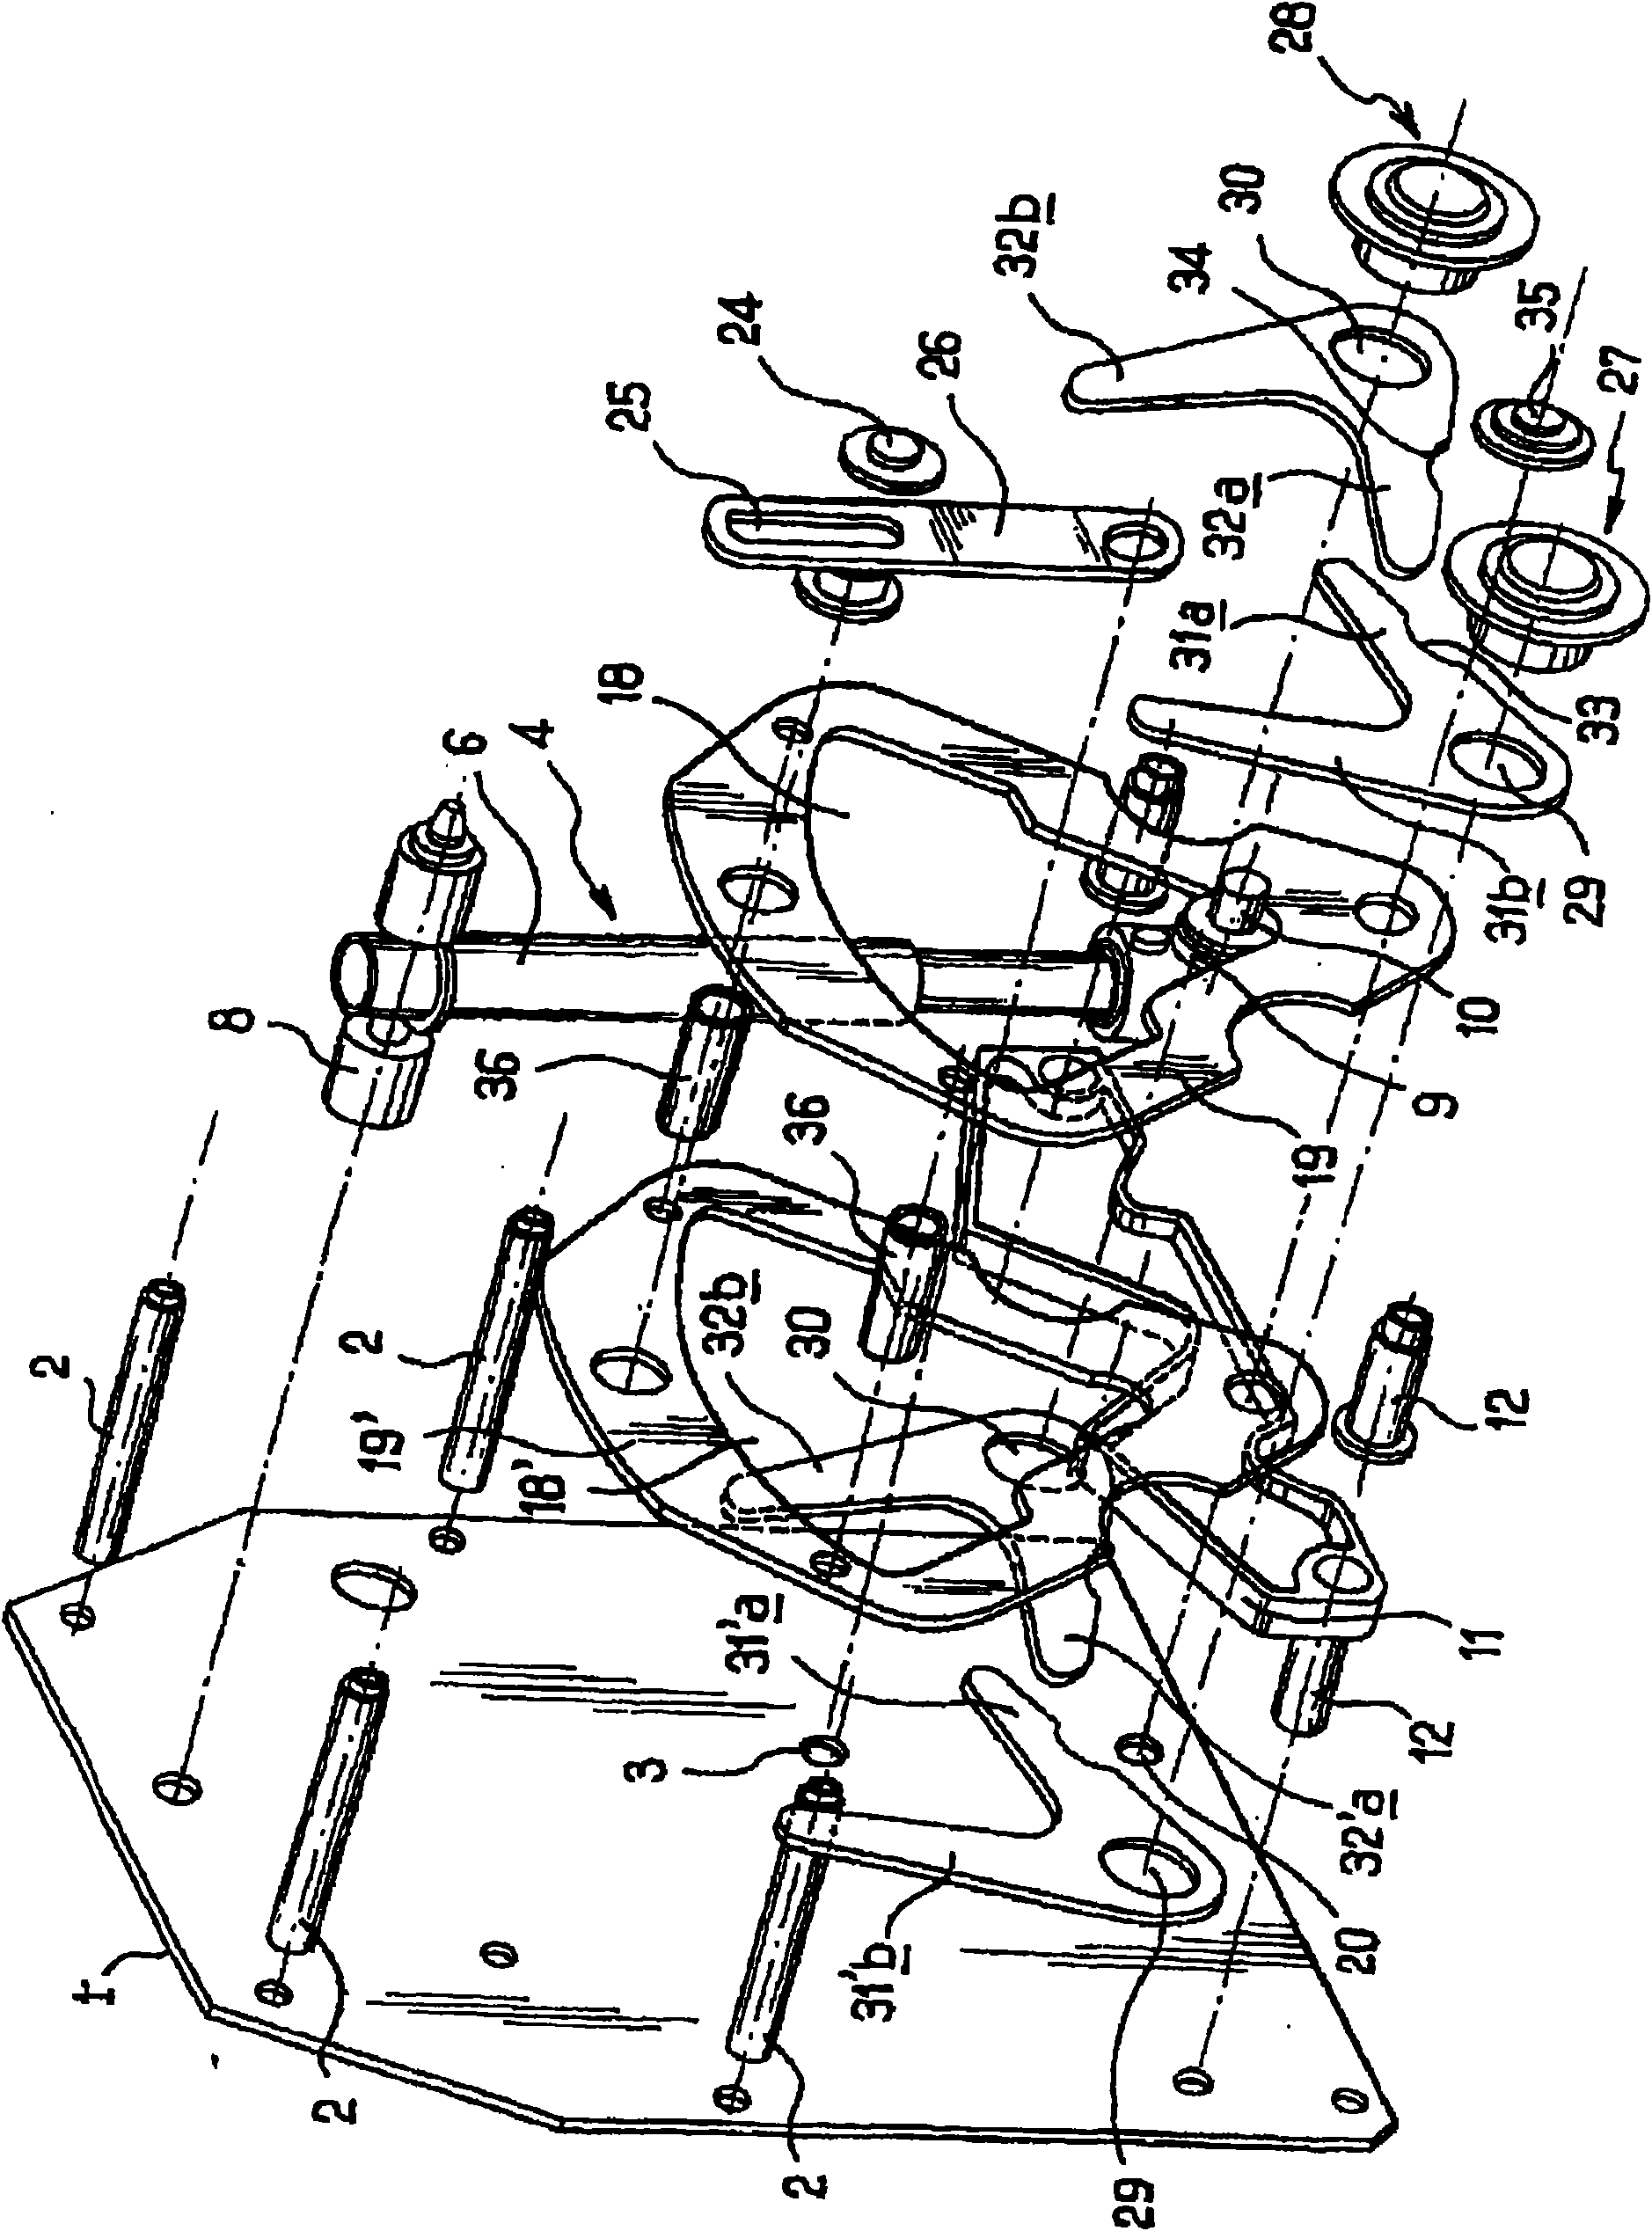 Control mechanism of multipolar electrical switch